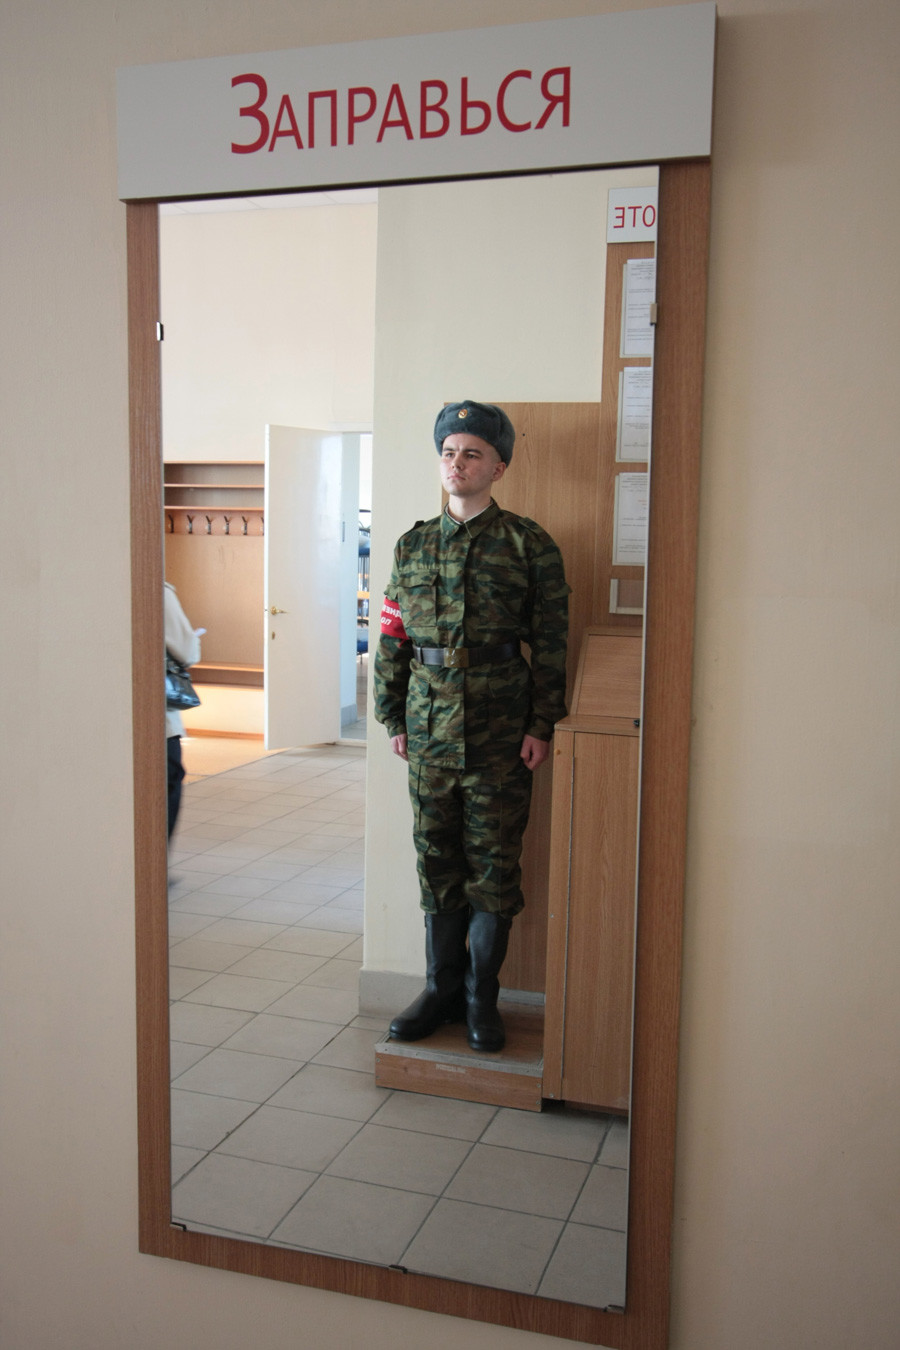 Barracks soldier is on duty at Patriot enlistment office in Kazan.